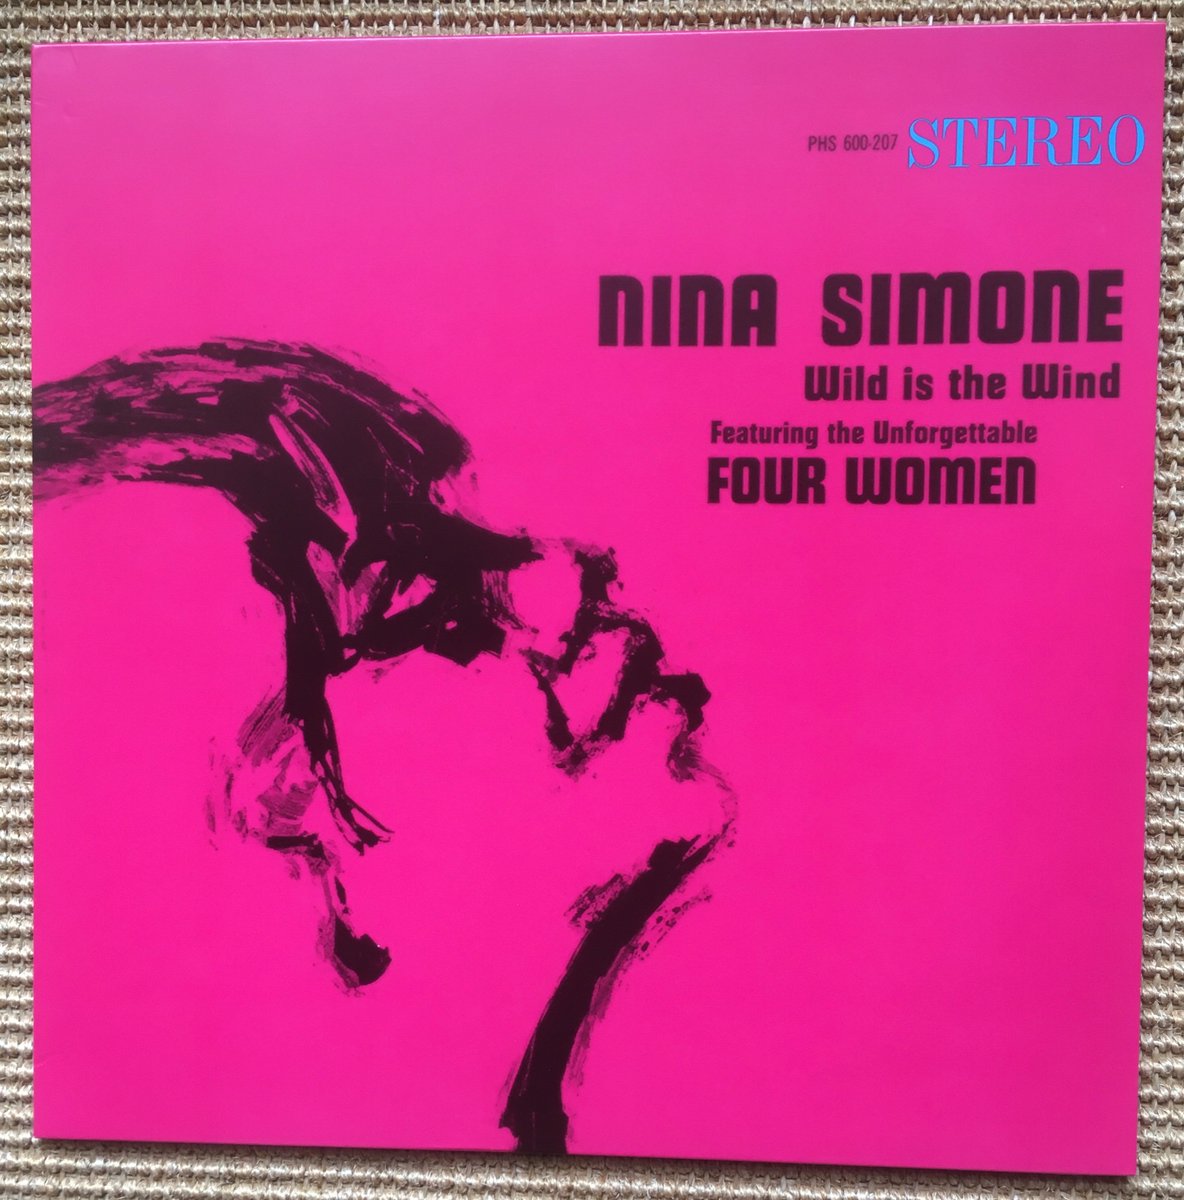 #Top15FaveAlbums Choosing from my vinyl in reverse date order 15. Wild is the Wind - Nina Simone 1966 Only contains 1 of her own compositions but it is the mighty Four Women. Her version of Wild is the Wind is sublime & then there’s Lilac Wine, heart achingly beautiful.